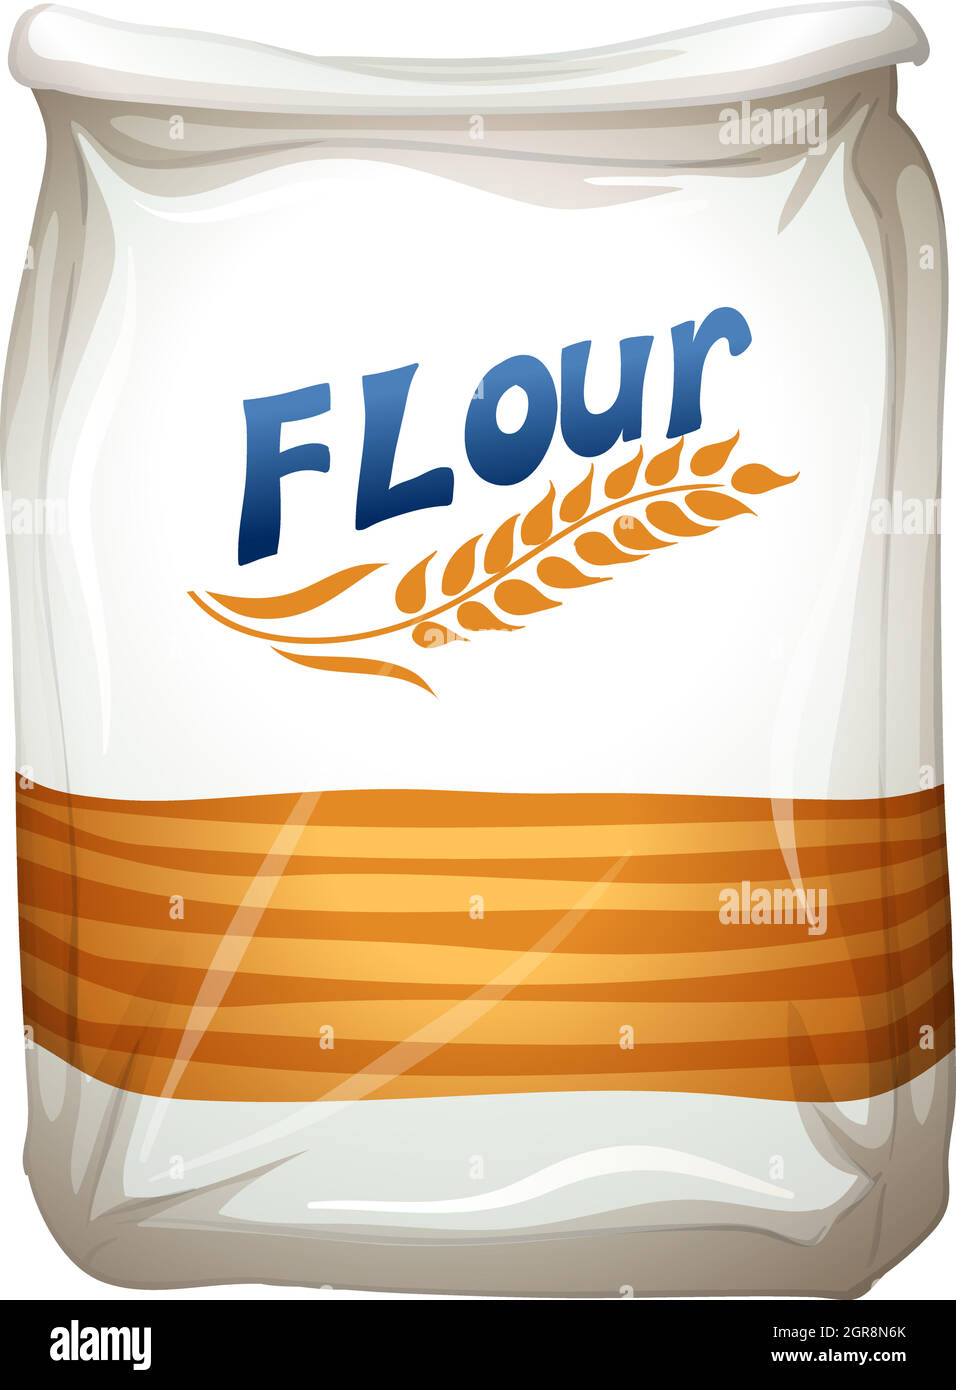 A packet of flour Stock Vector